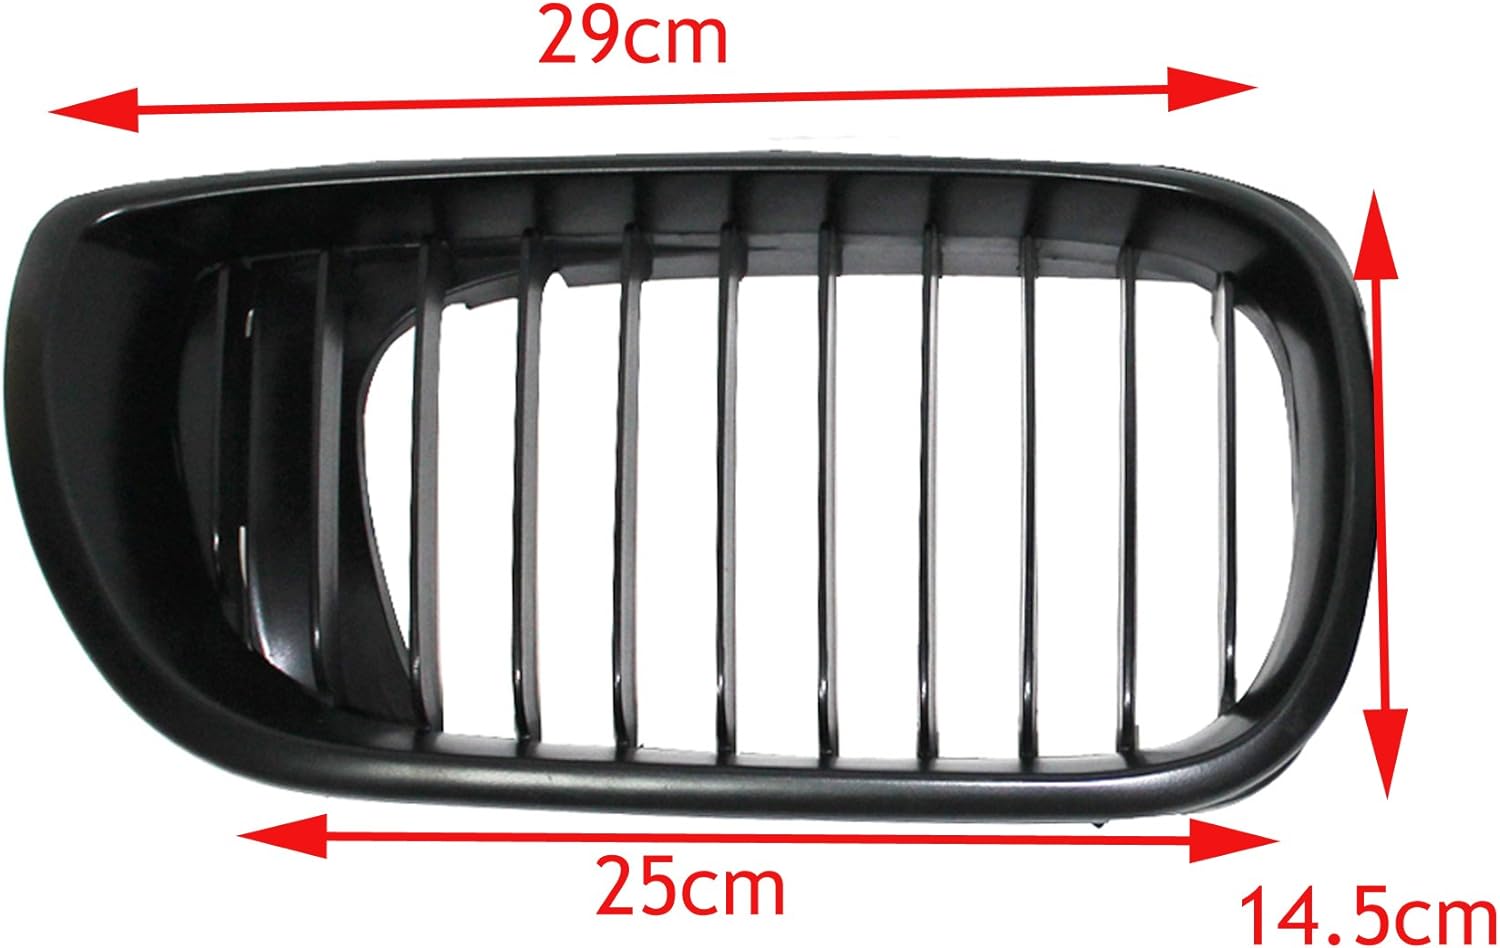 HuihuangAMZus Heart Horse Front Kidney Grill Grilles for B-M-W E46 2002-2005 4 door 4D 3 Series Car Front Bumper Grille Gloss Black